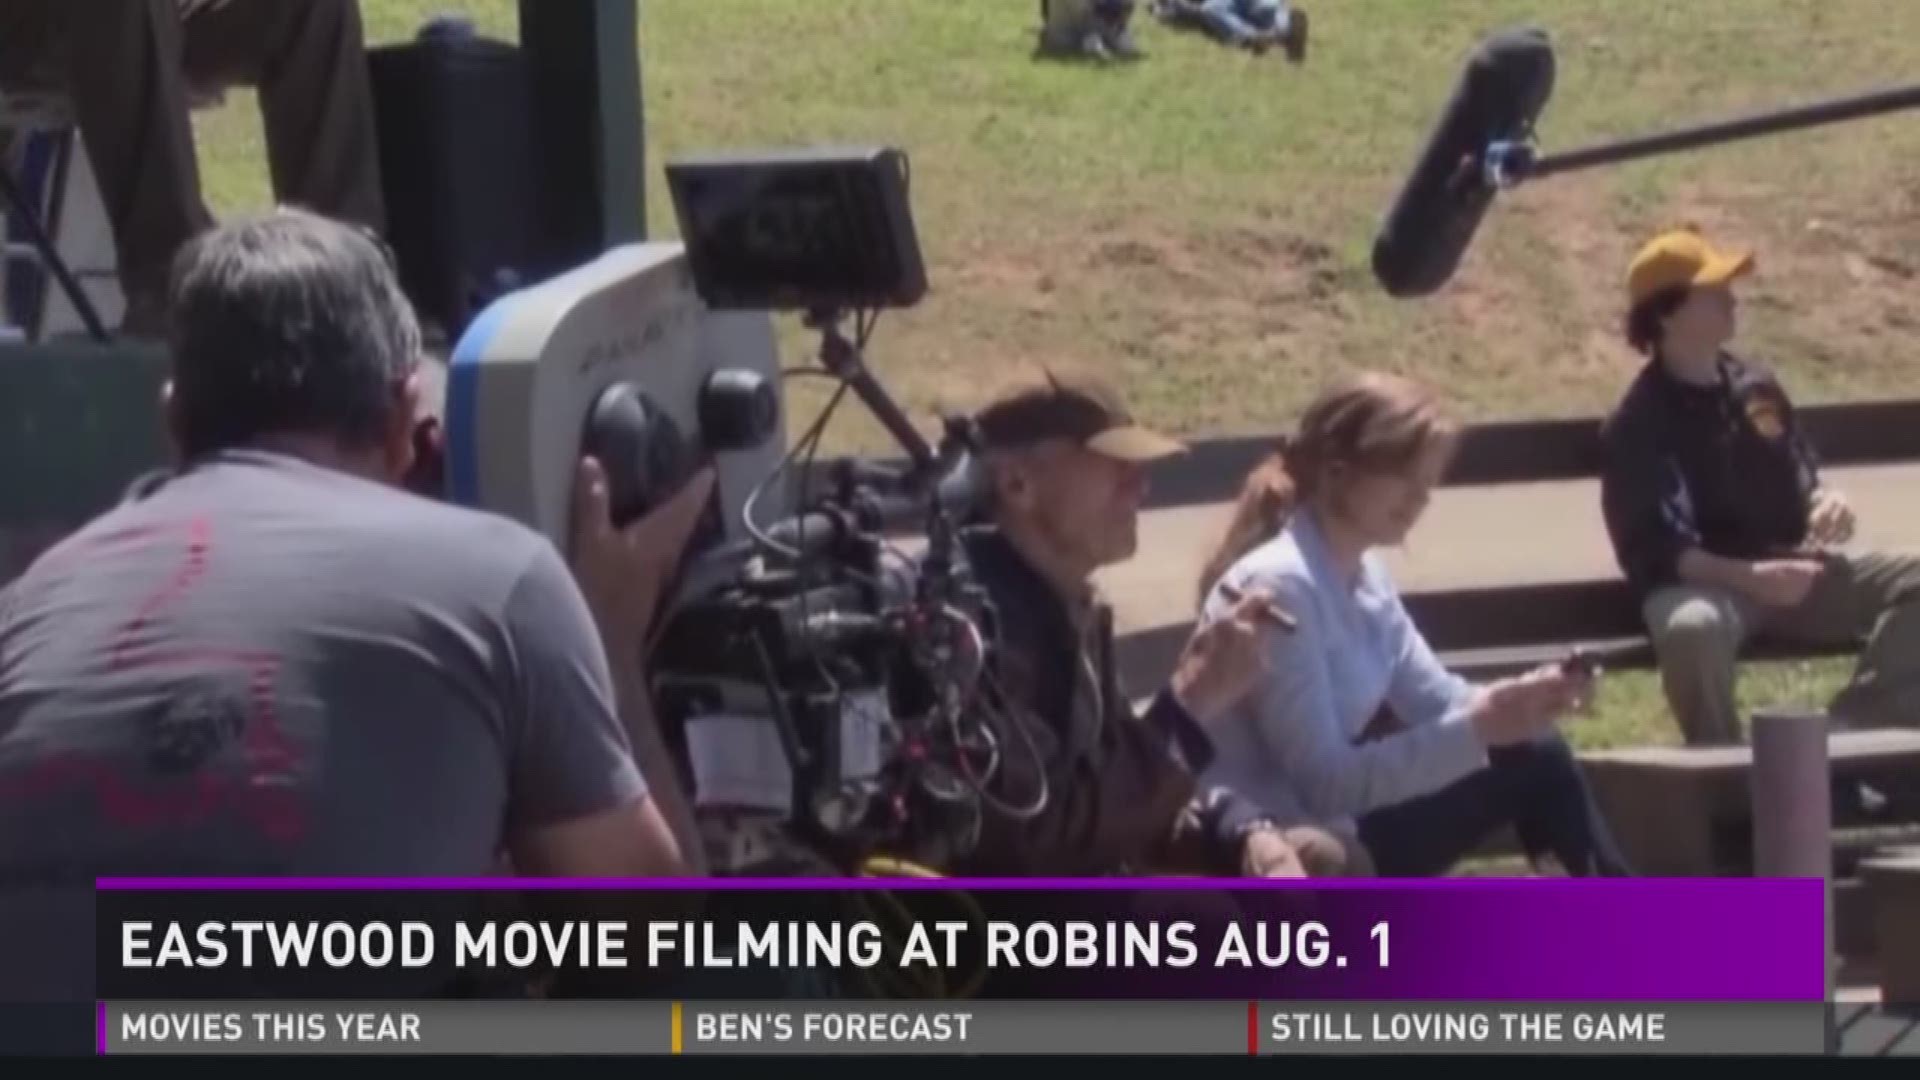 Clint Eastwood movie filming at Robins Air Force Base August 1